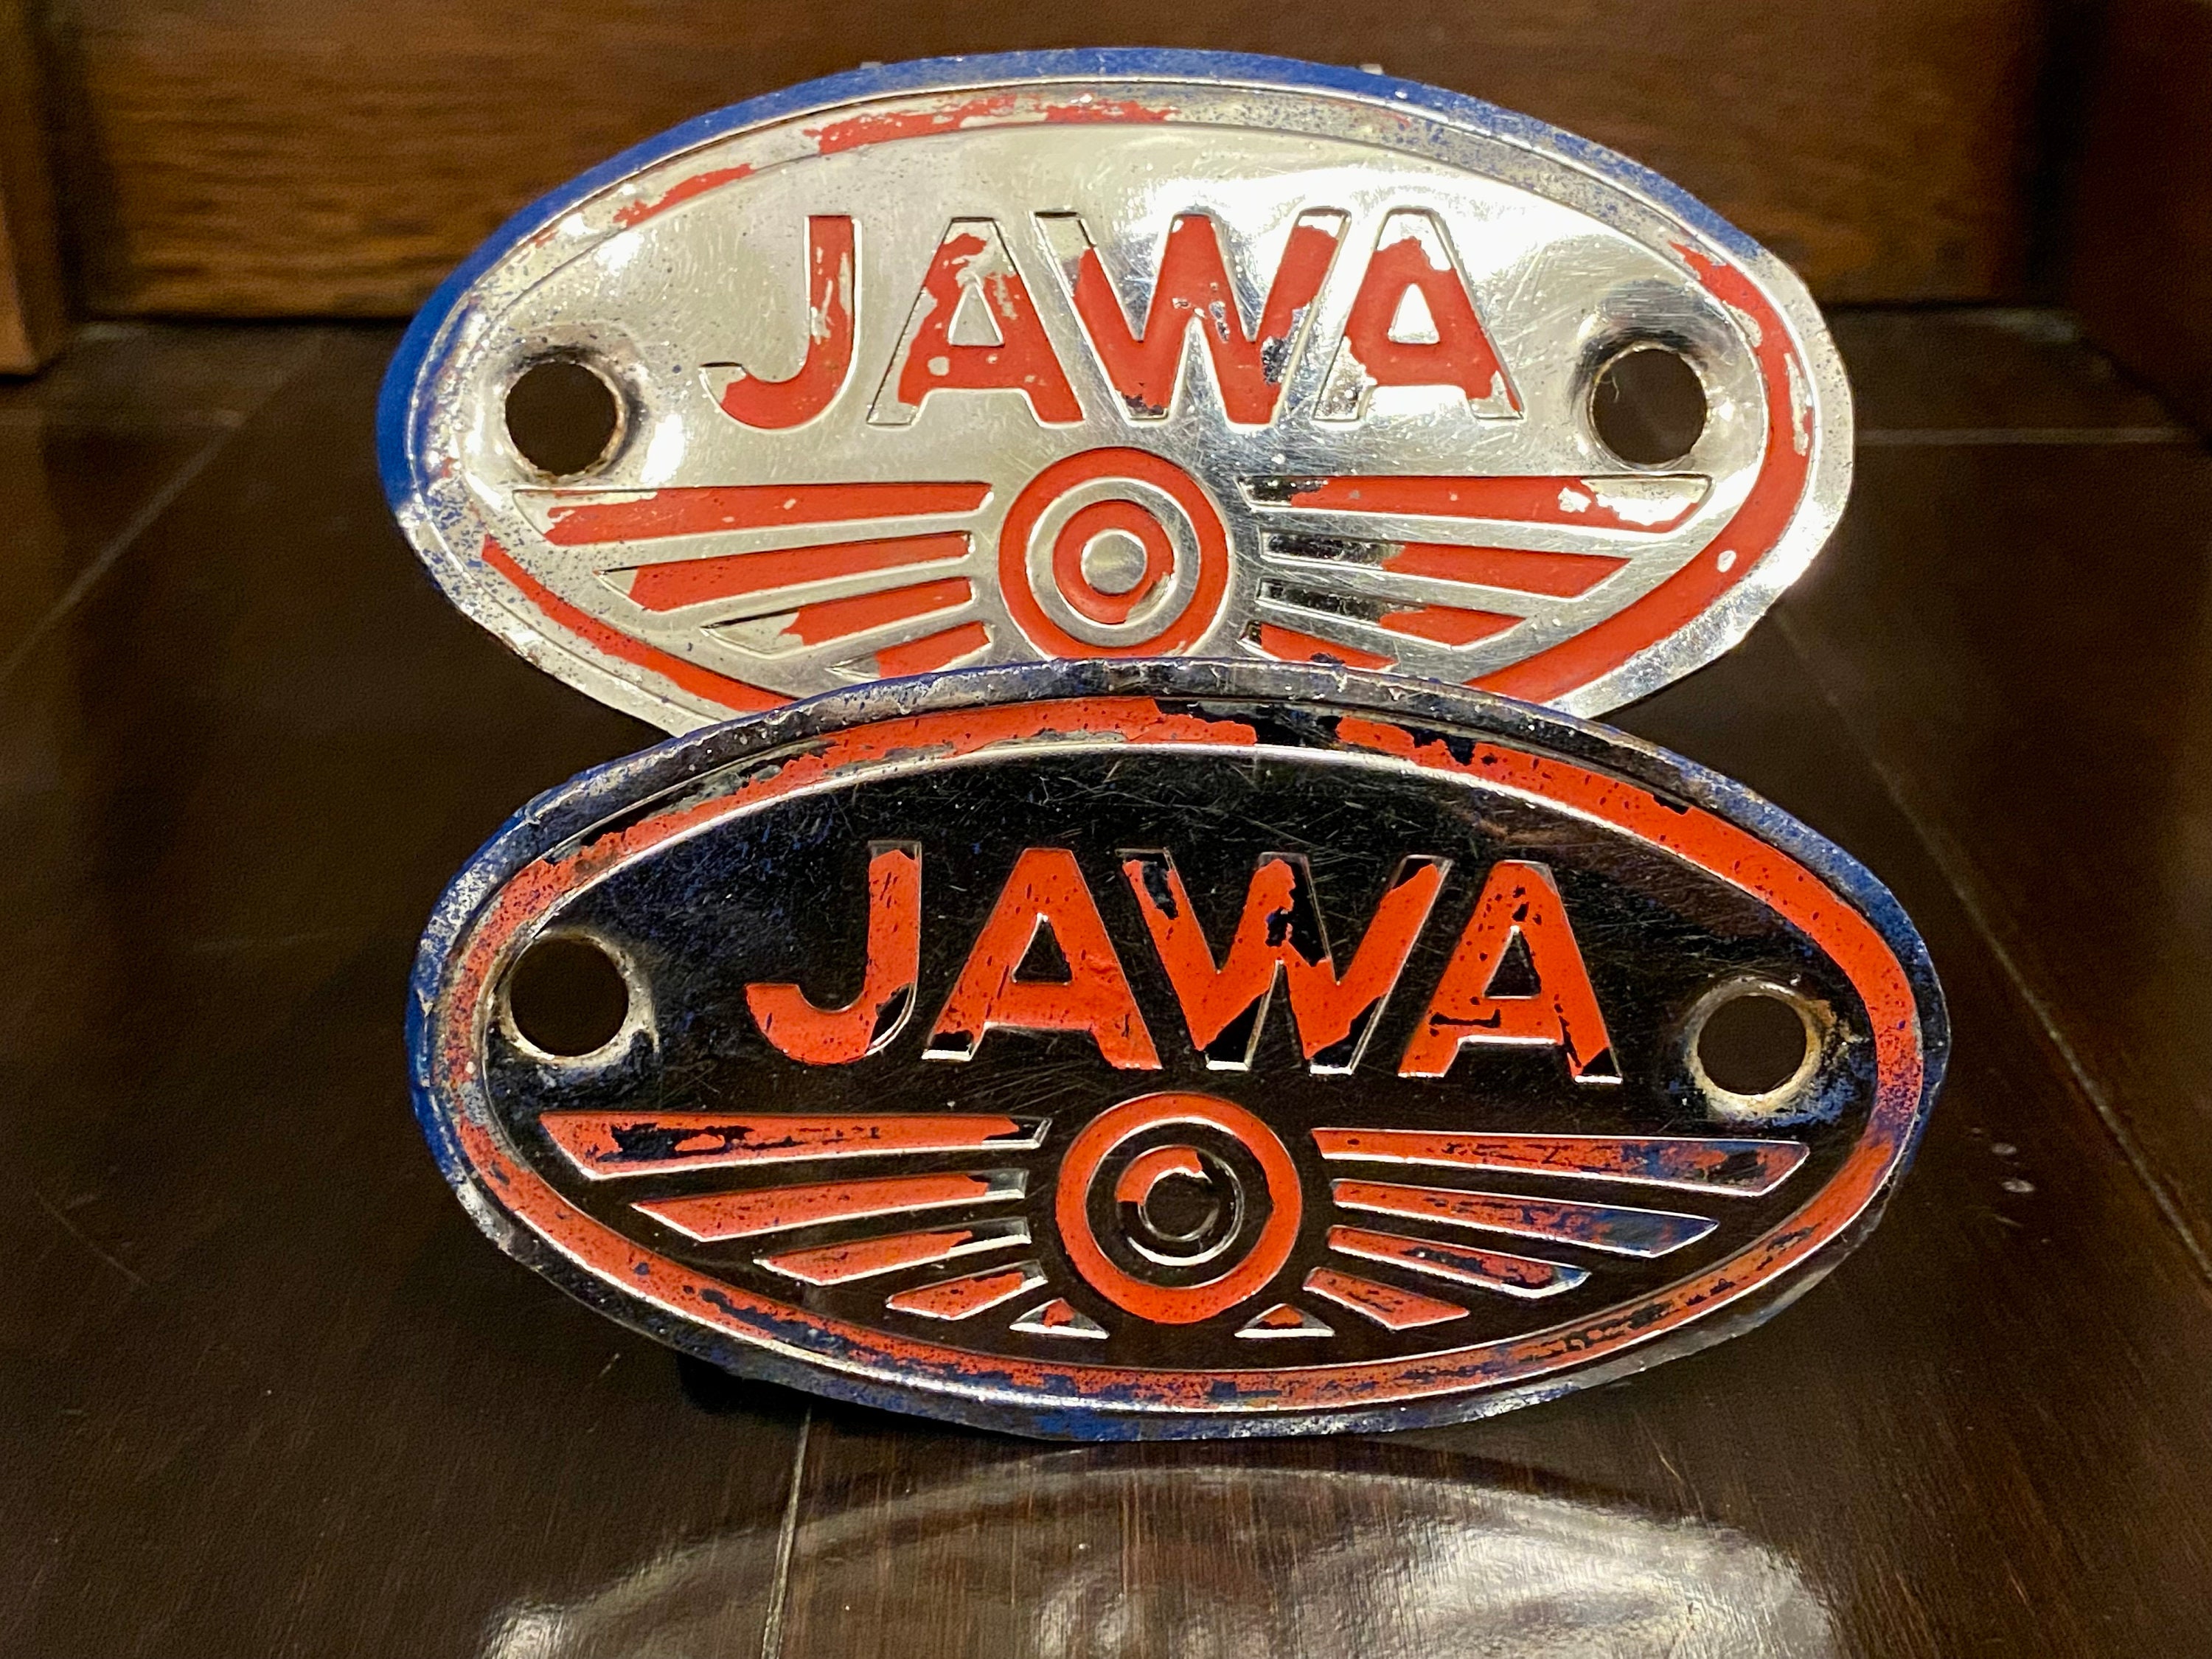 #b055-1 Jawa motorcycle logo Embroidered Patch Iron on/Sew on Size: 8,6 x 4,8 cm FBA clearance sale 3,4″ x 1,9″ 